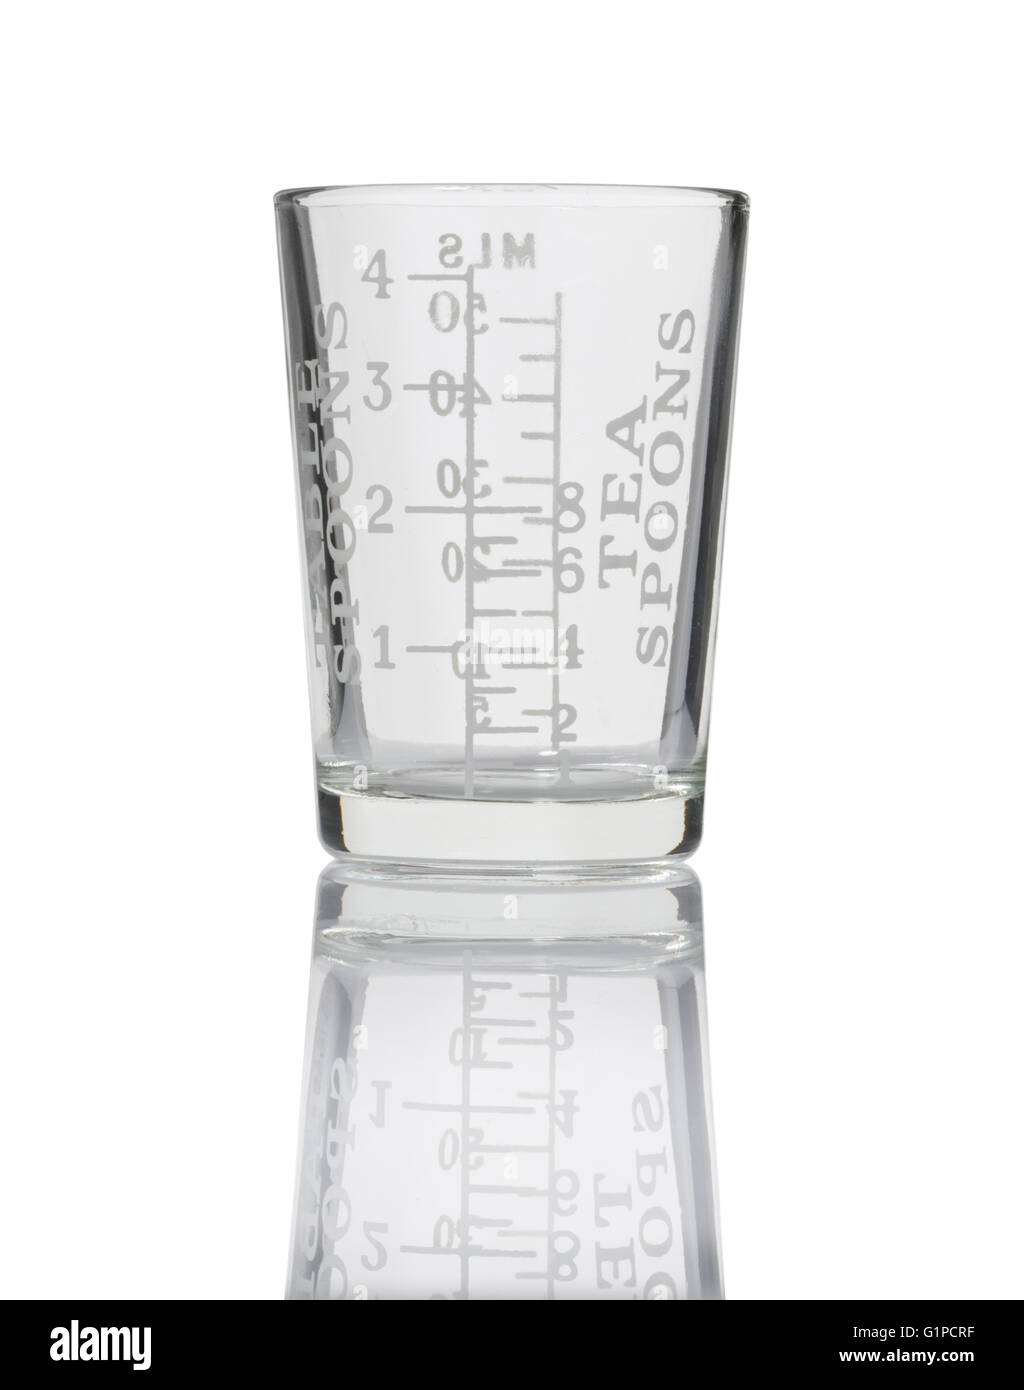 https://c8.alamy.com/comp/G1PCRF/old-fashioned-glass-measuring-cup-with-tea-spoons-table-spoons-and-G1PCRF.jpg